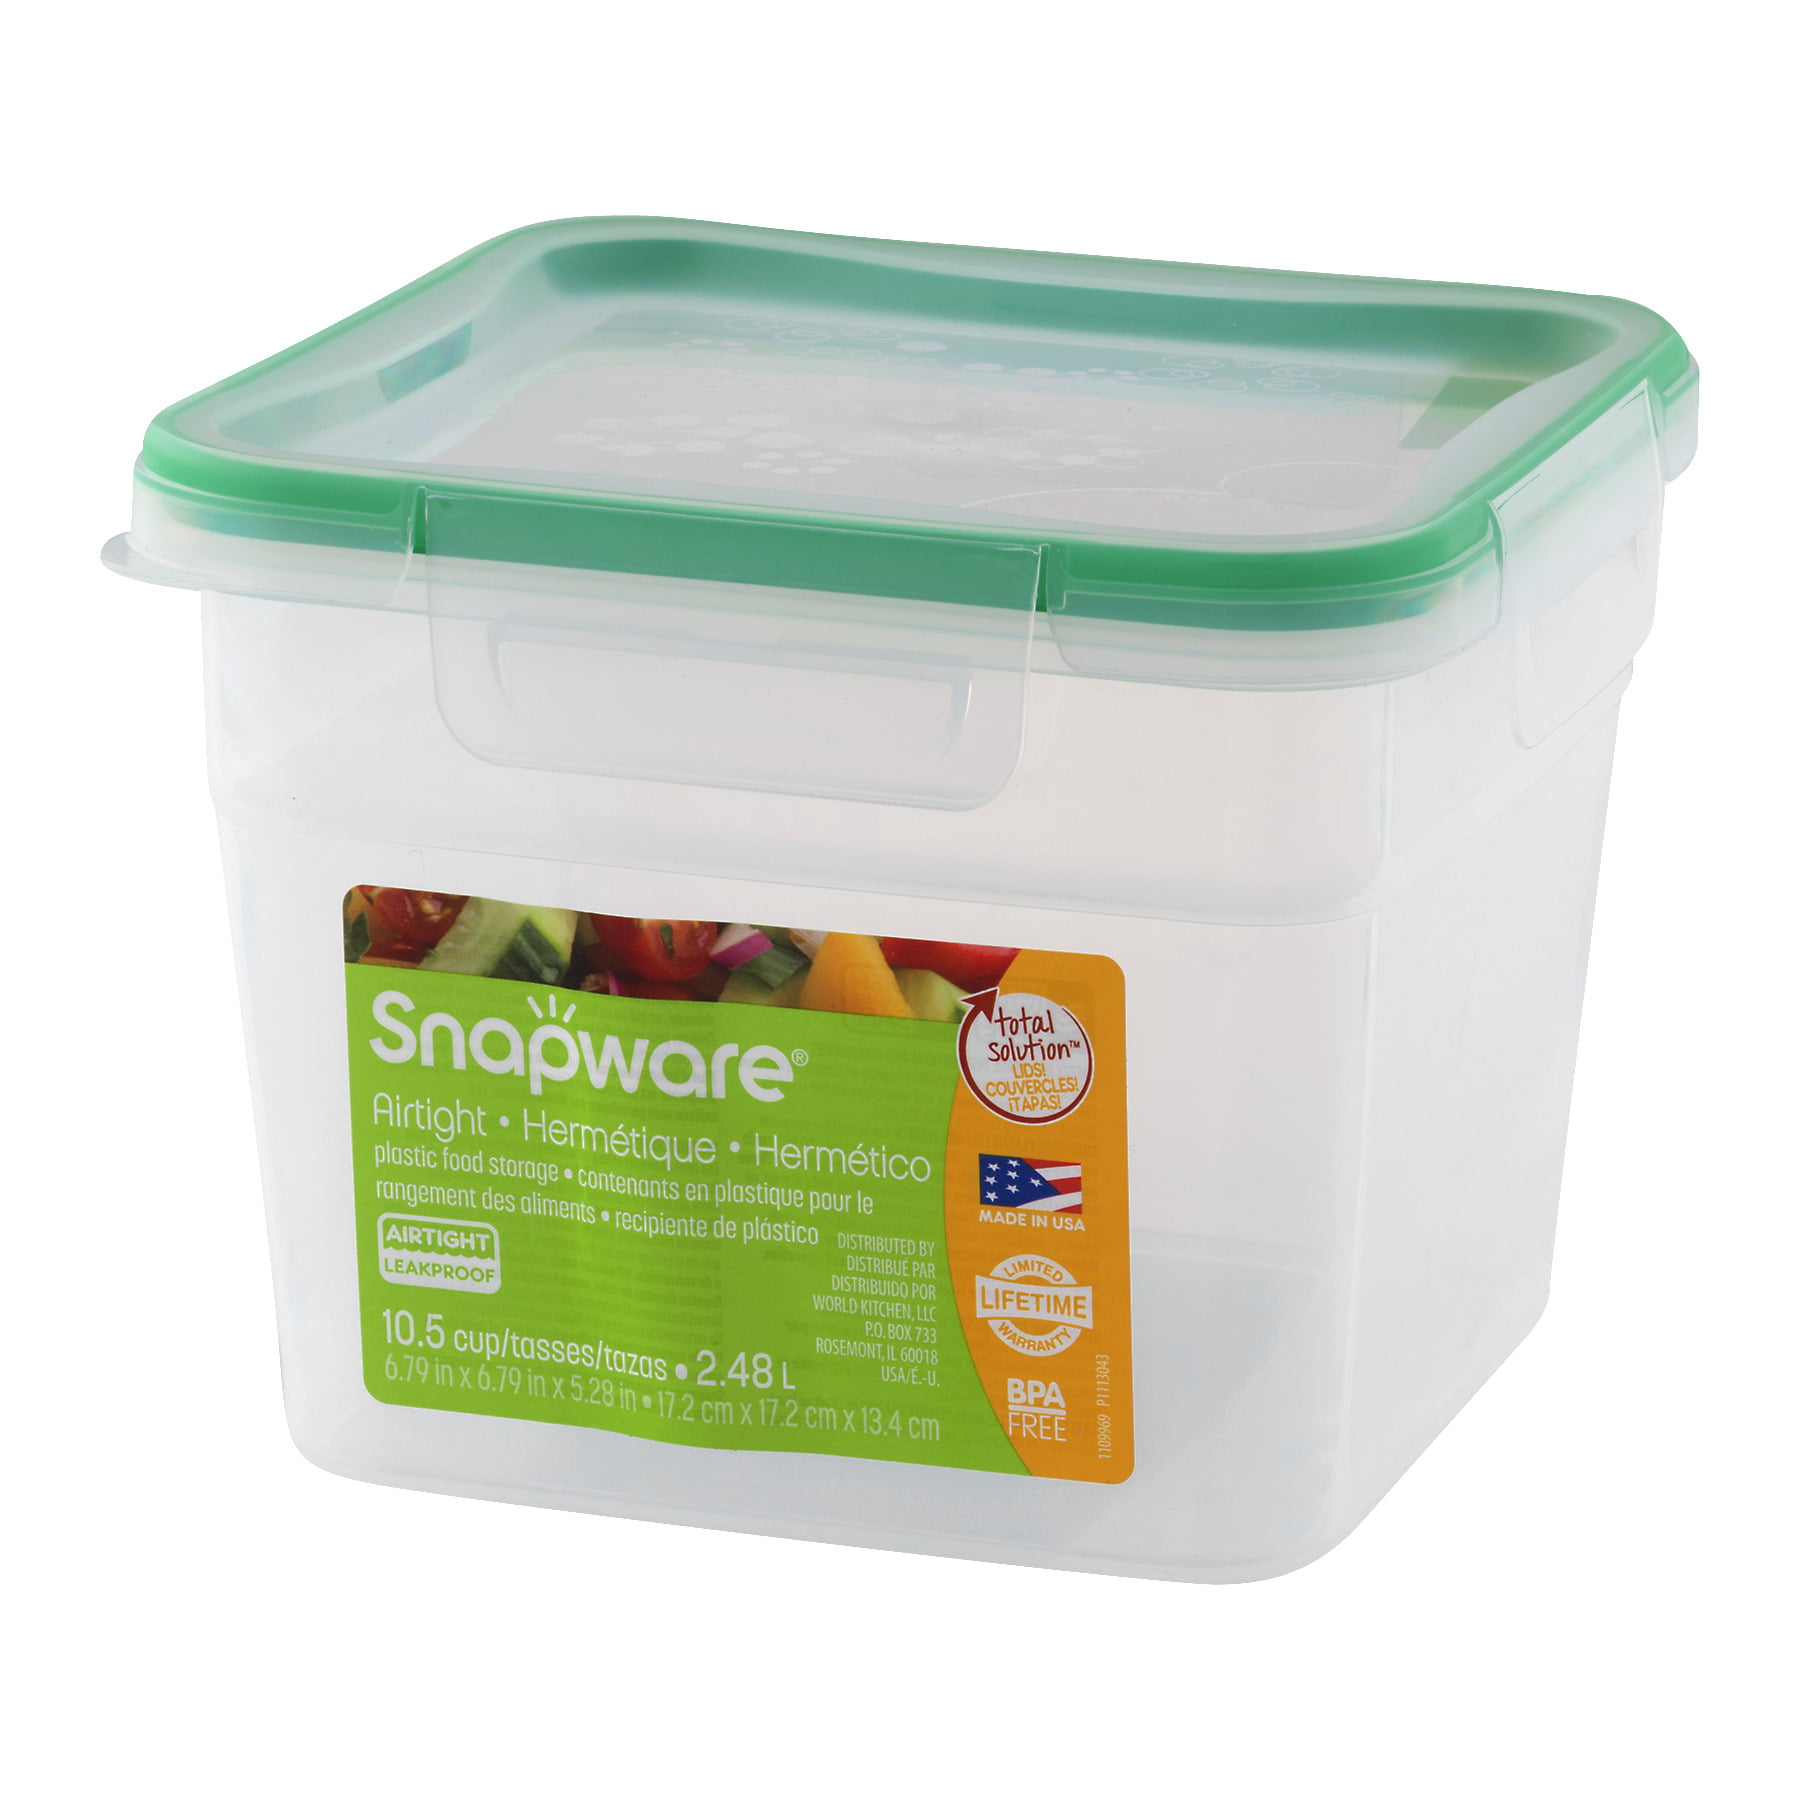 Snapware Slim Rectangle Food Storage Container - Clear, 10.8 Cup - Foods Co.